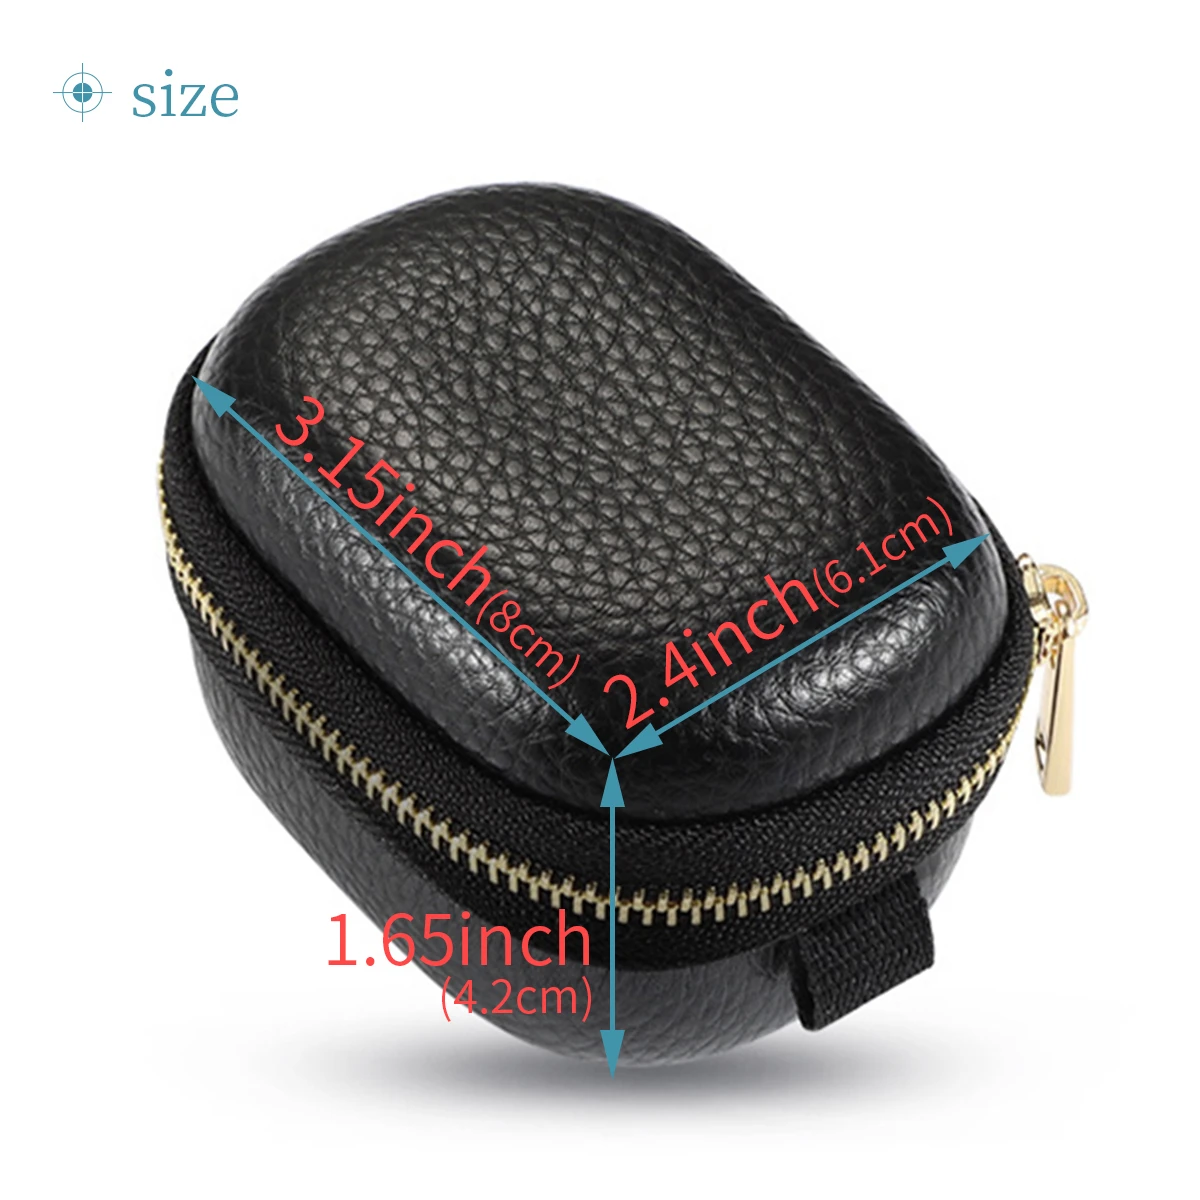 Hard EVA Storage Bags for Bang Olufsen Beoplay E8 3rd Generation Ture Wireless Earphones E8 2.0/3.0 Headset Travel Carrying Case enlarge